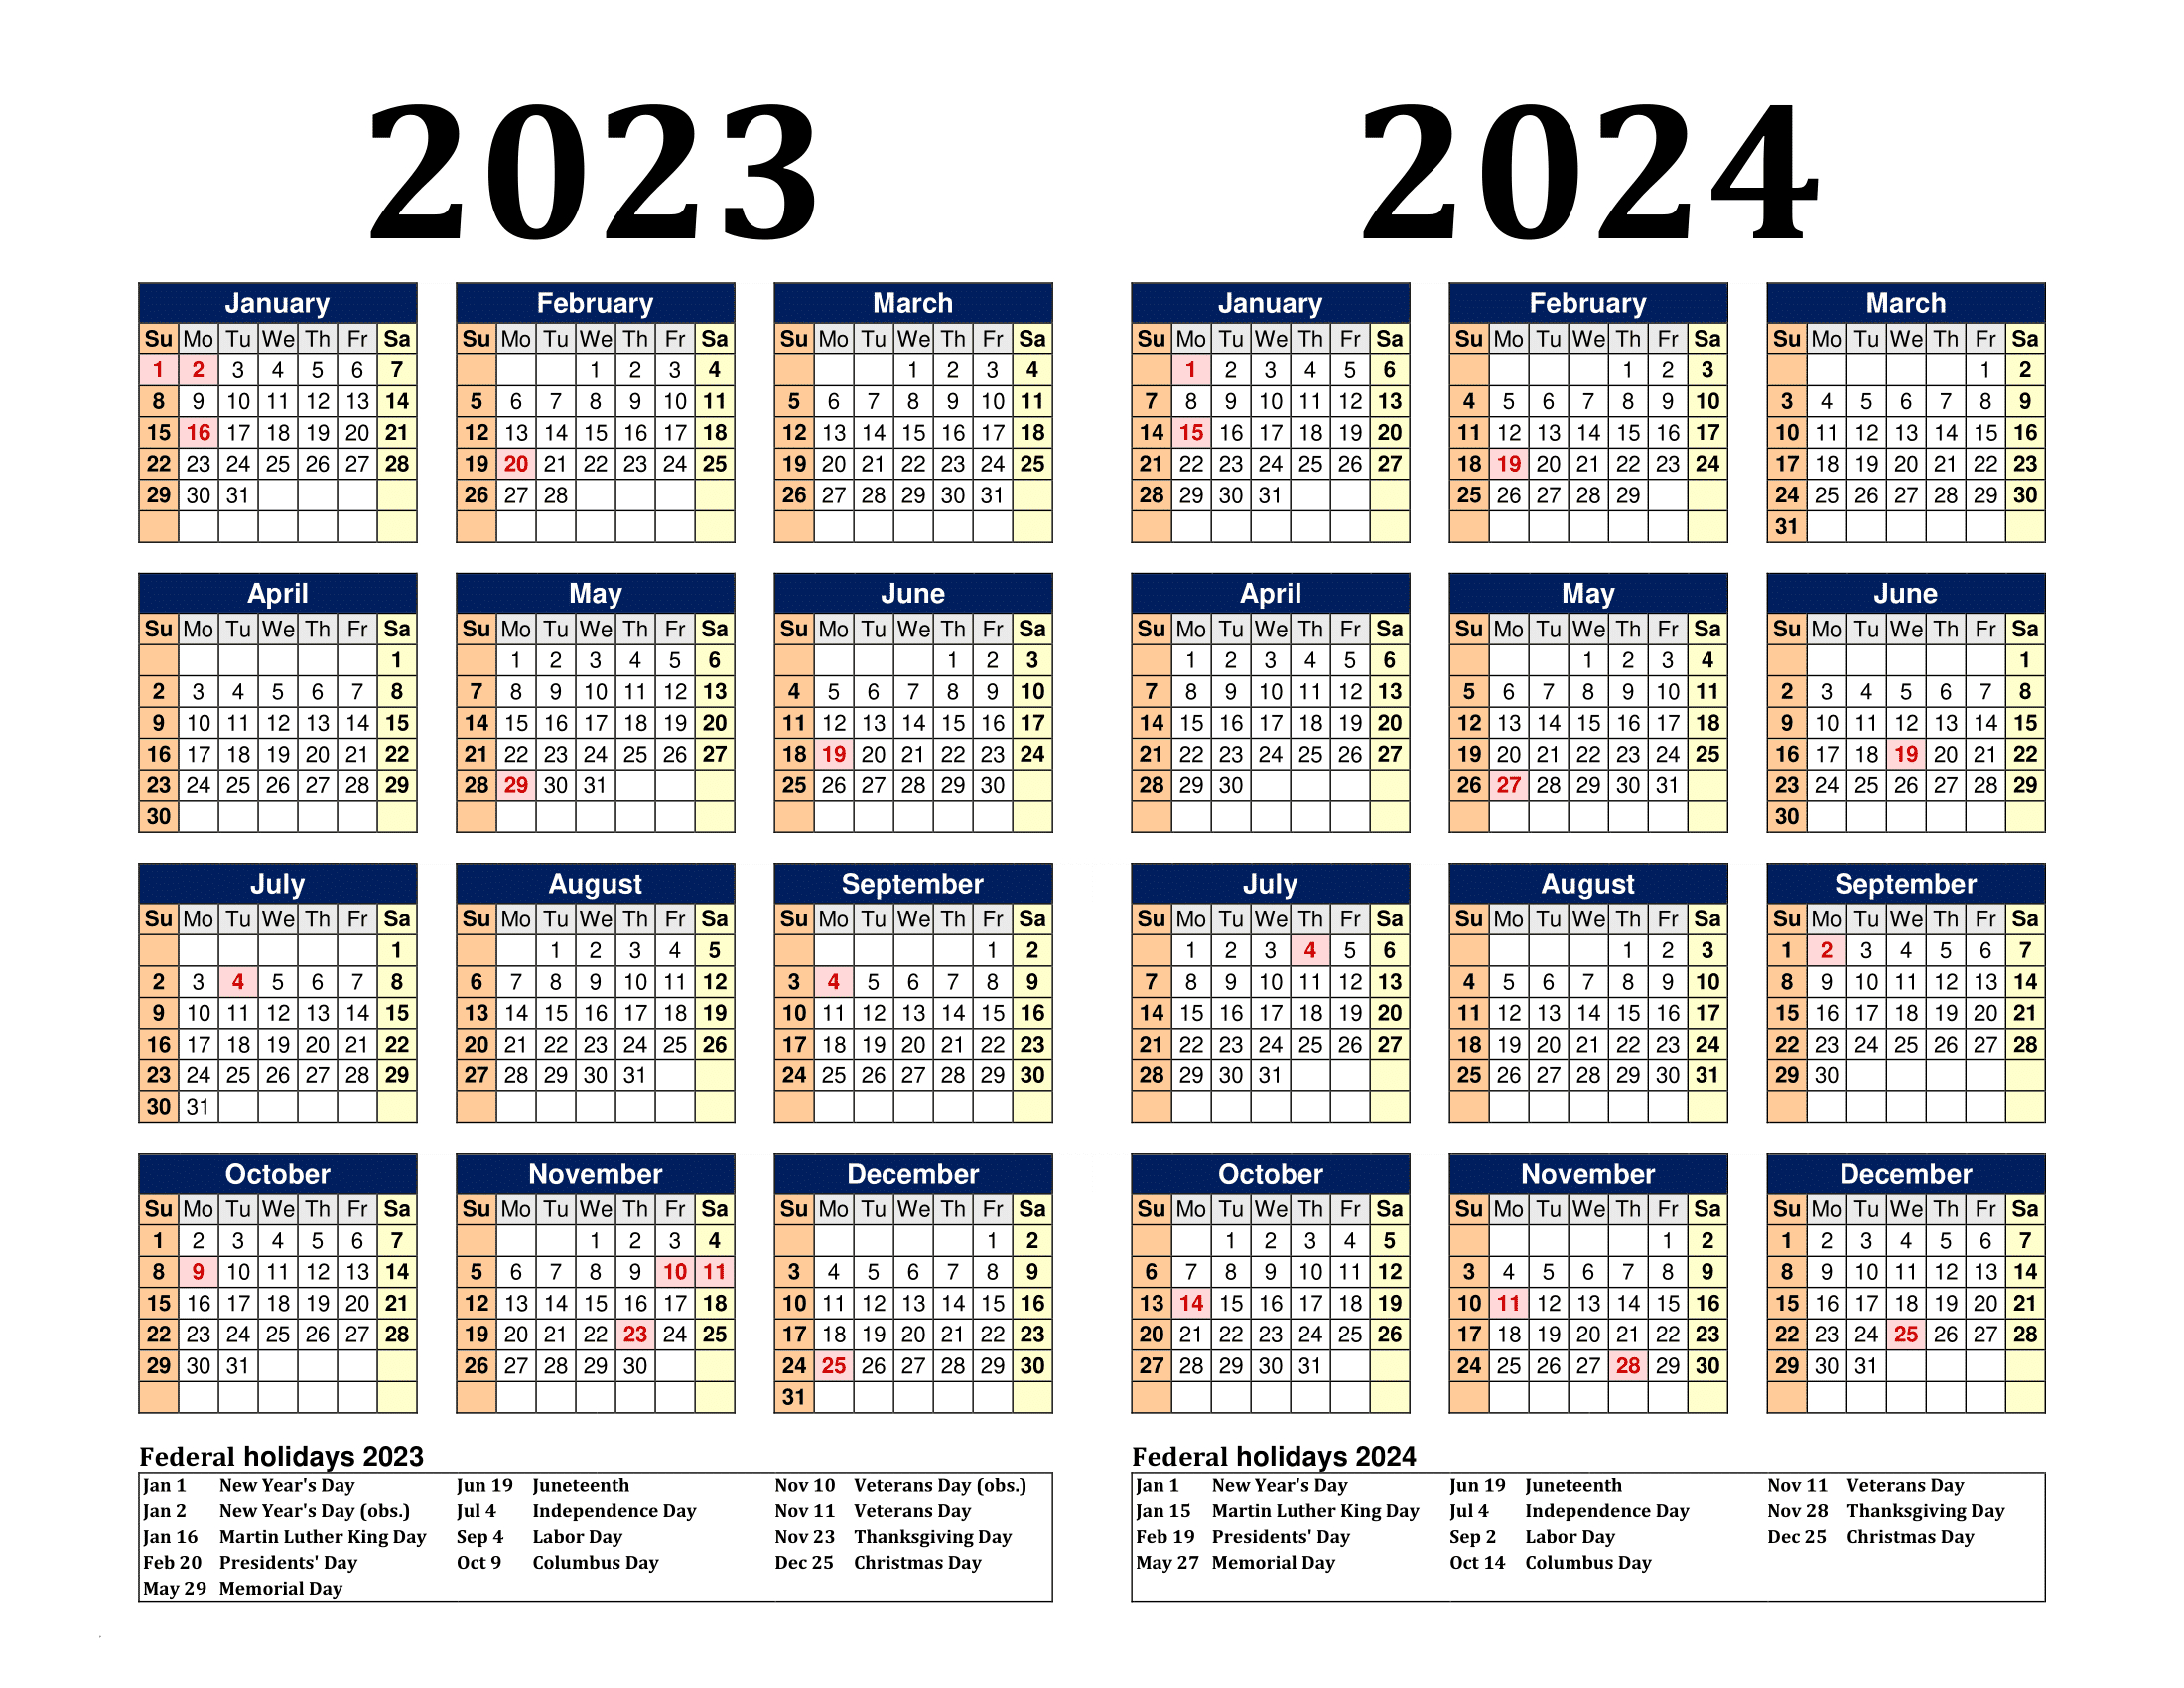 Free Printable Two Year Calendar Templates For 2023 And 2024 In Pdf | Yearly Calendar 2023 And 2024 Printable